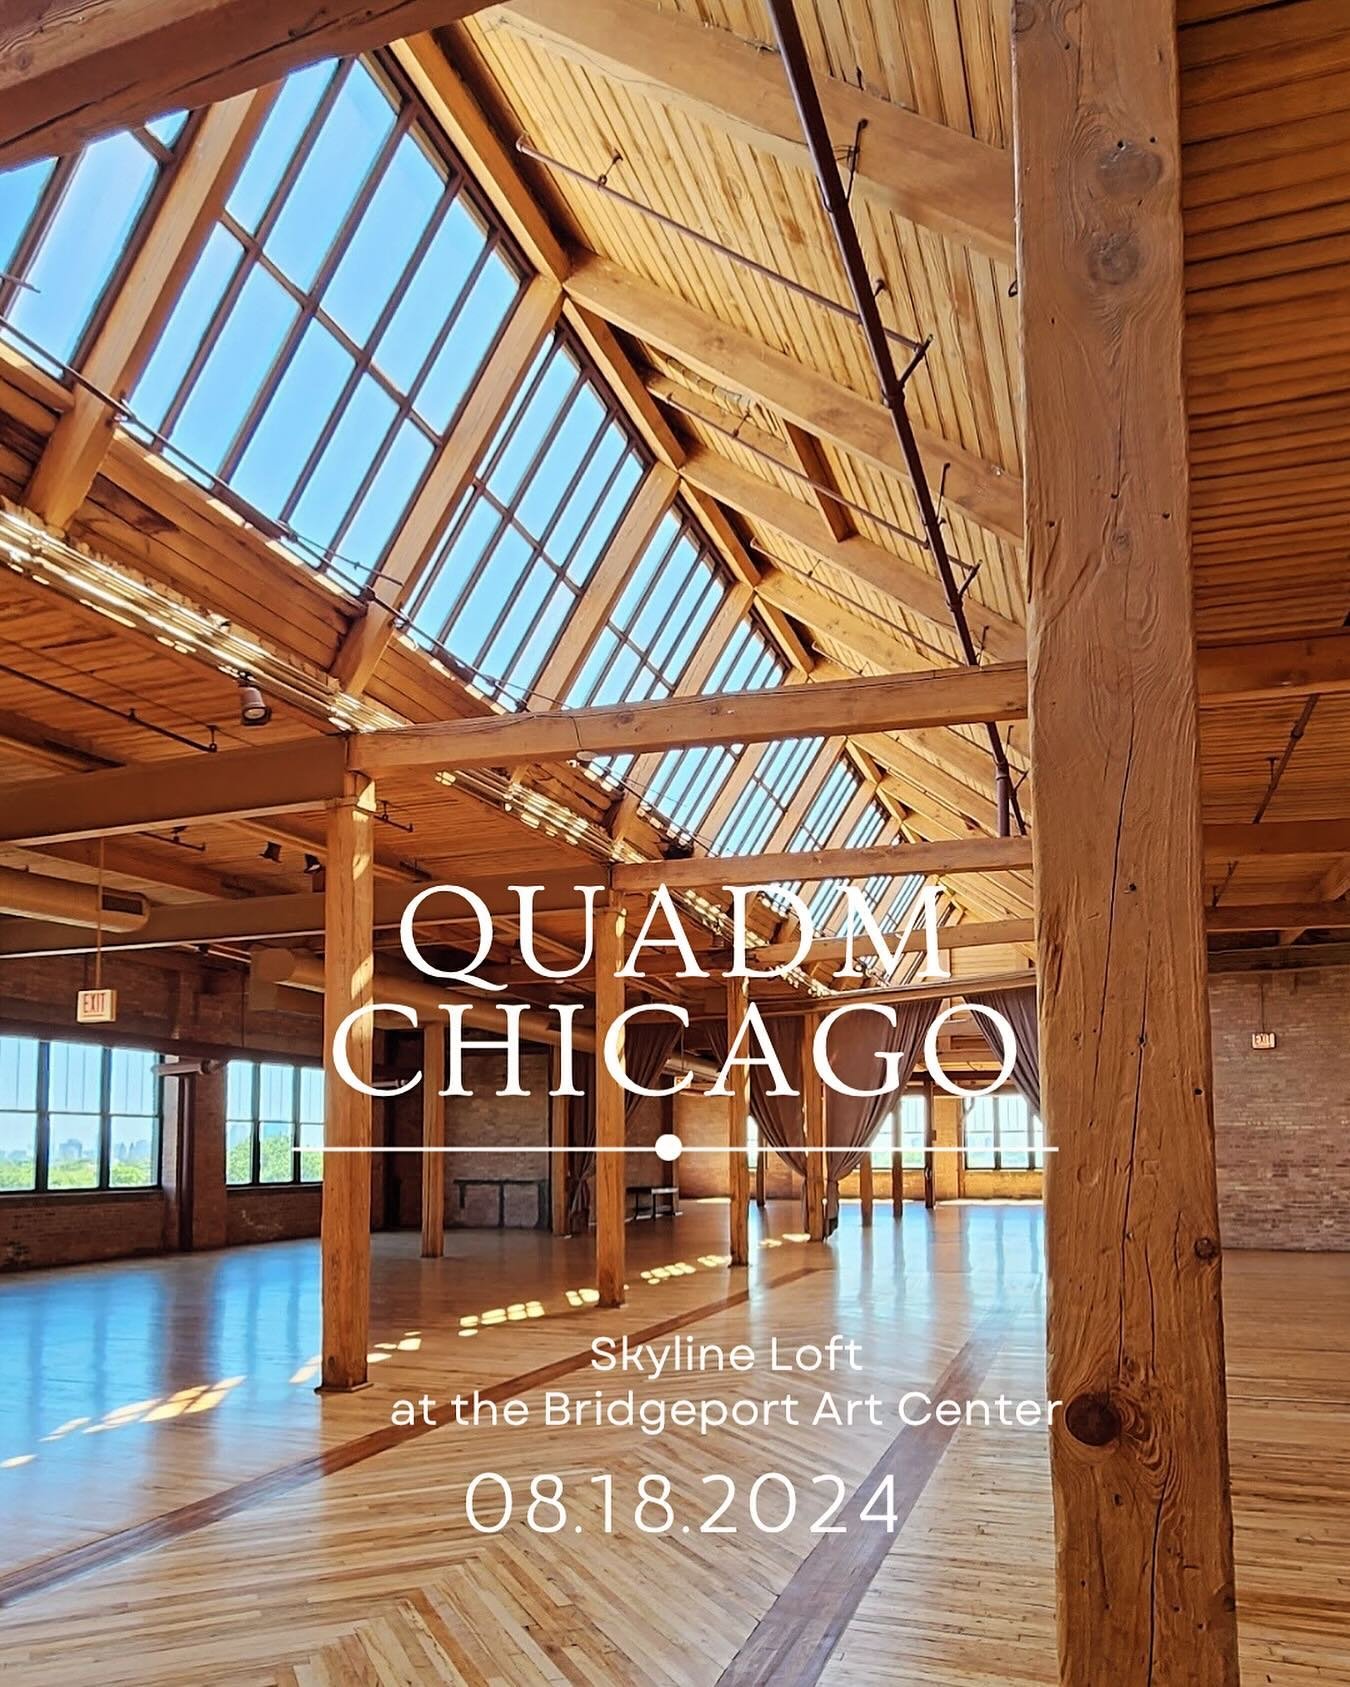 QUADM CHICAGO will be held at the Skyline Loft at the Bridgeport Art Center in Chicago! With its sophisitctaed yet rustic look on the top floor and windows overlooking the skyline and the iconic river,  it makes this truly a one of a kind event for Q